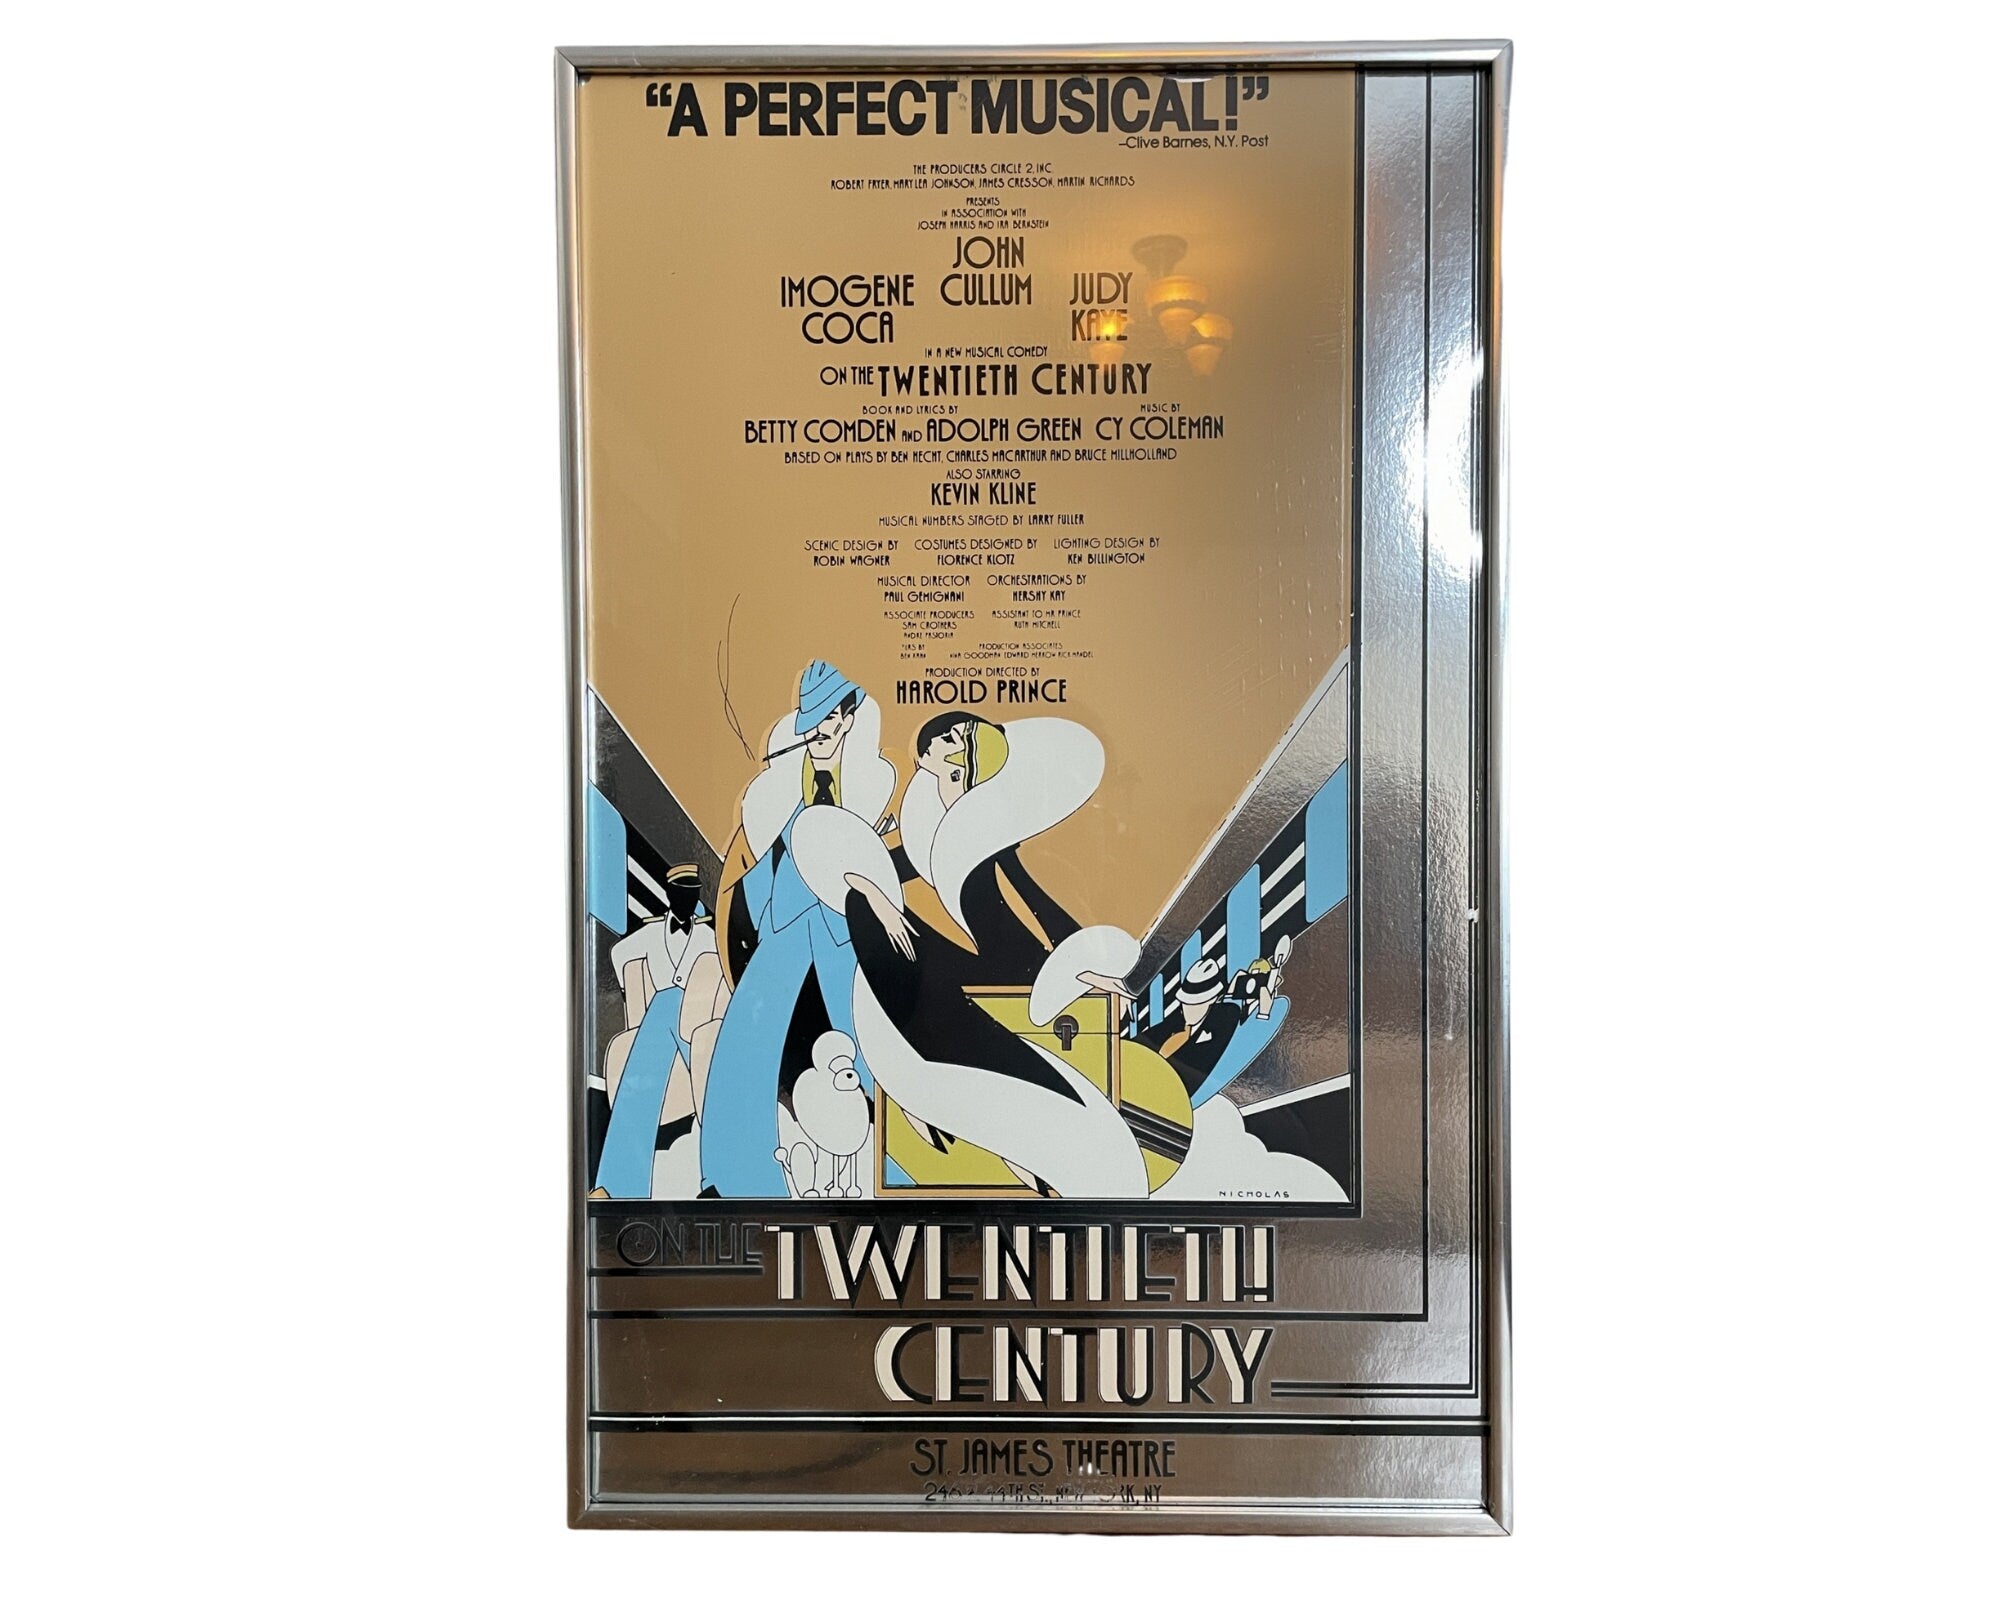 Framed Original Vintage 1978 Broadway Musical Poster of "On The 20th Century" at St James Theatre 14"x 22" | Living Room Gallery Wall Decor